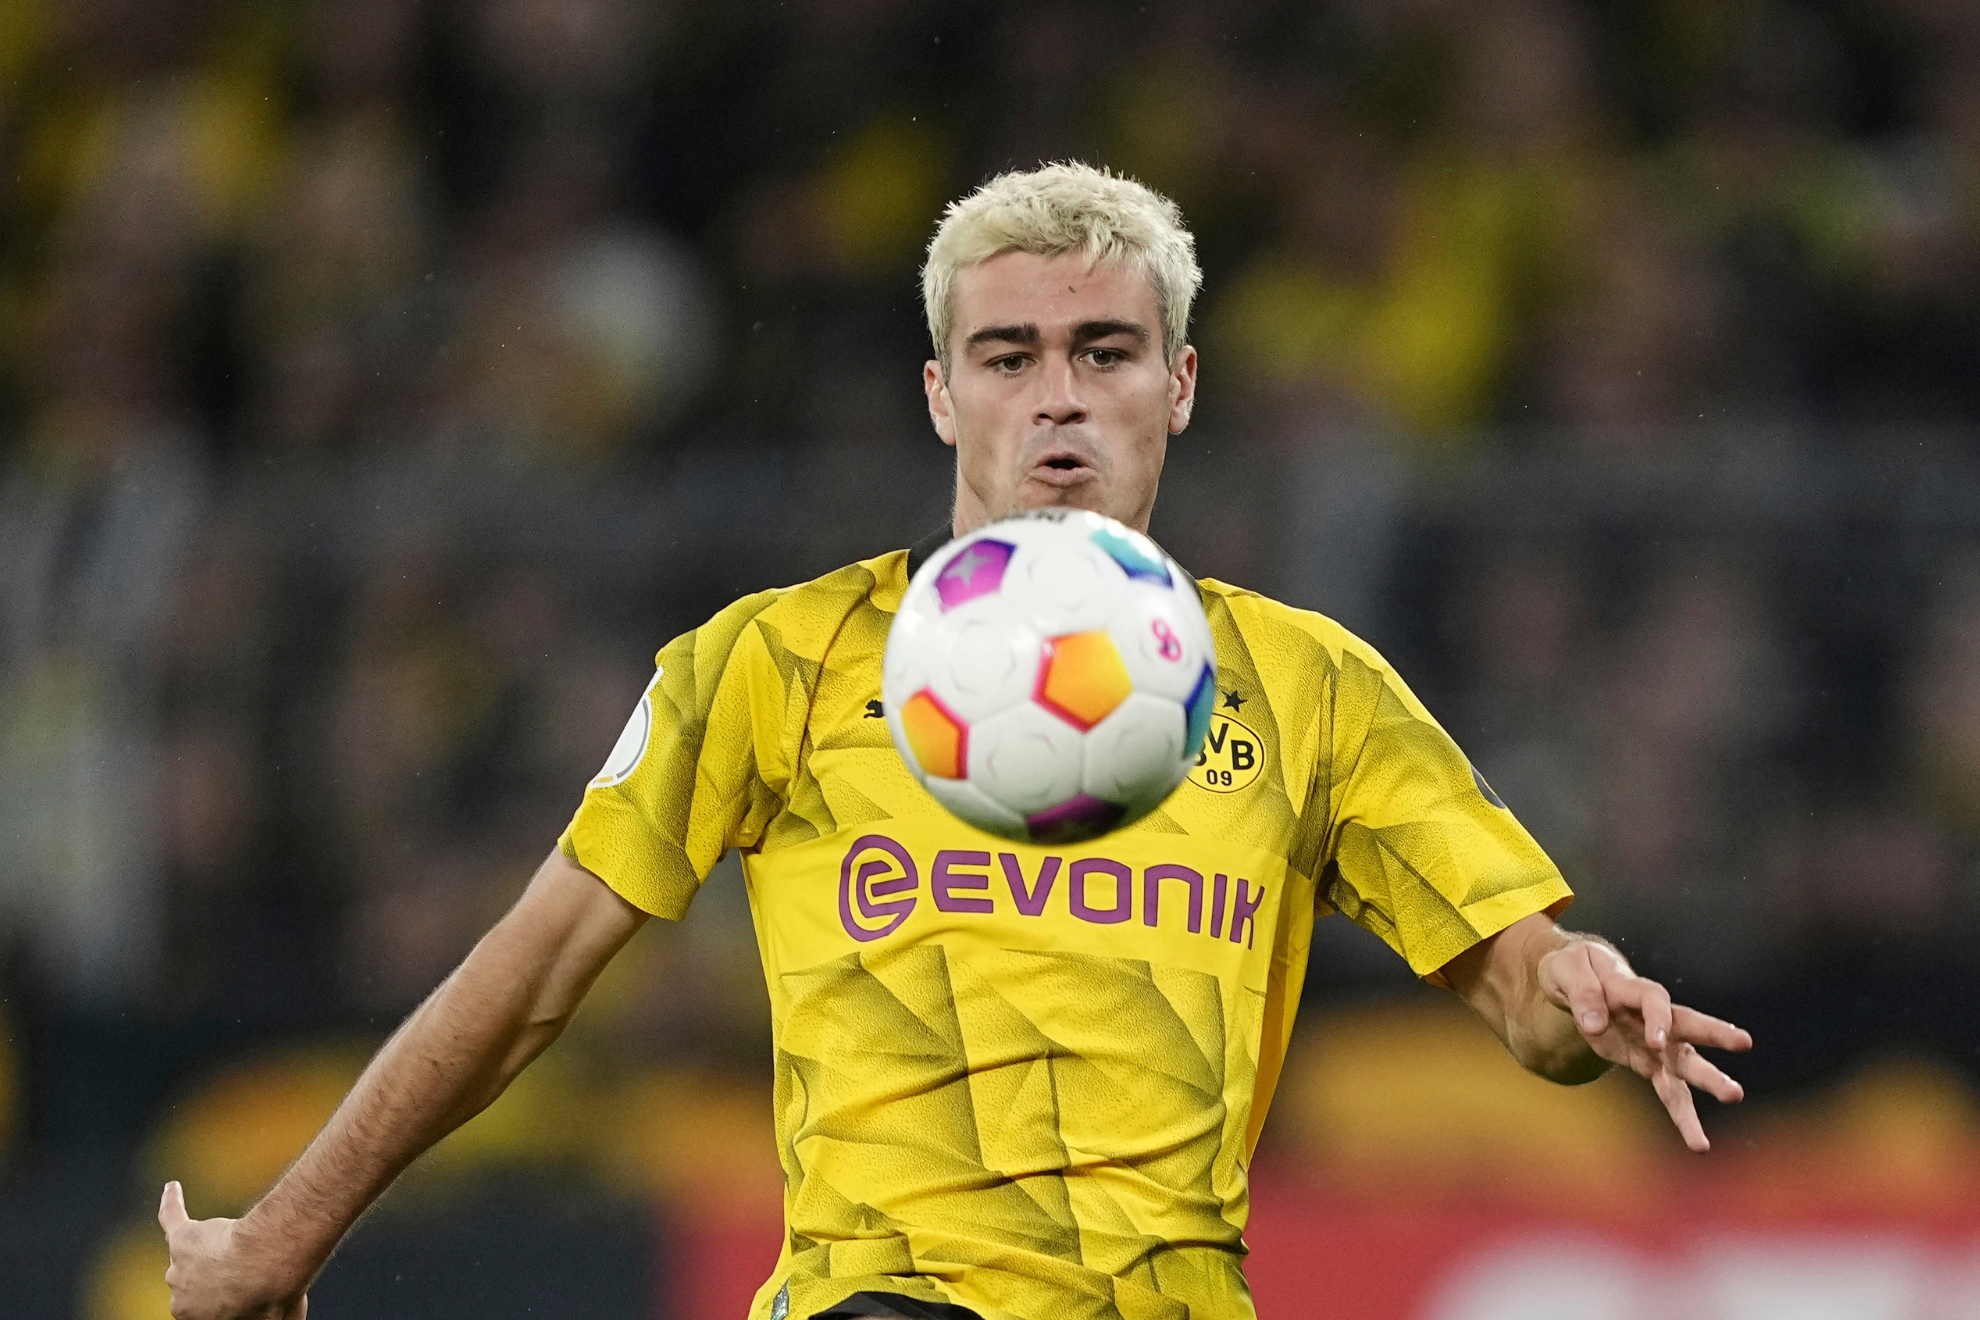 Reynas Dortmund career could be coming to an end -- at least temporarily.